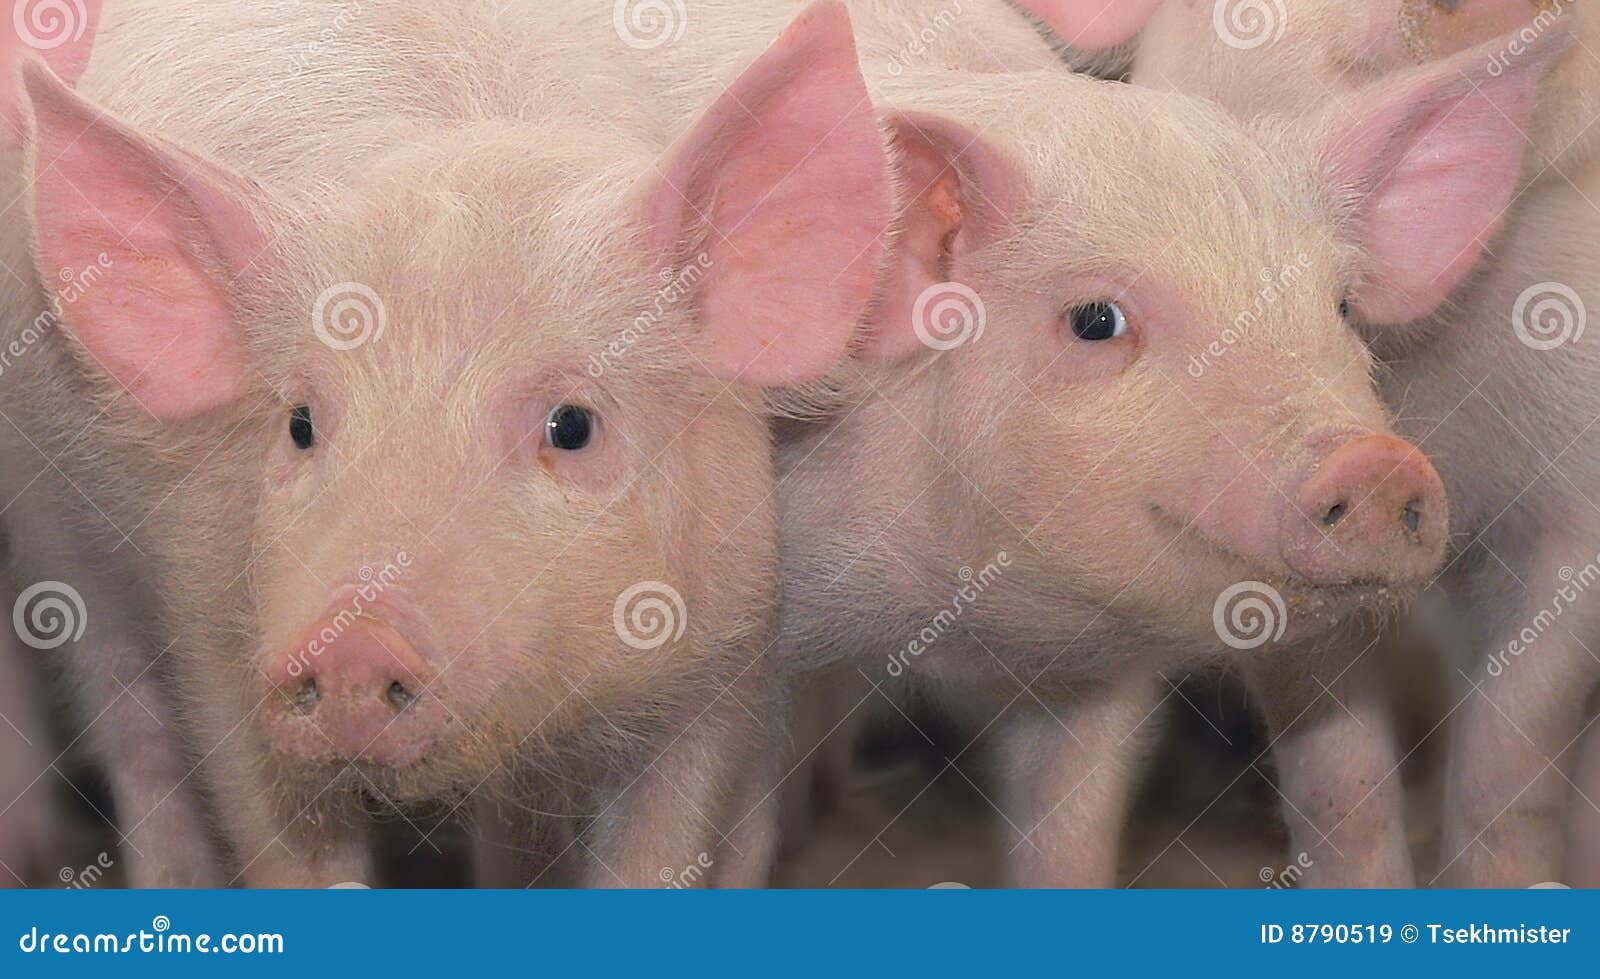 two young pigs